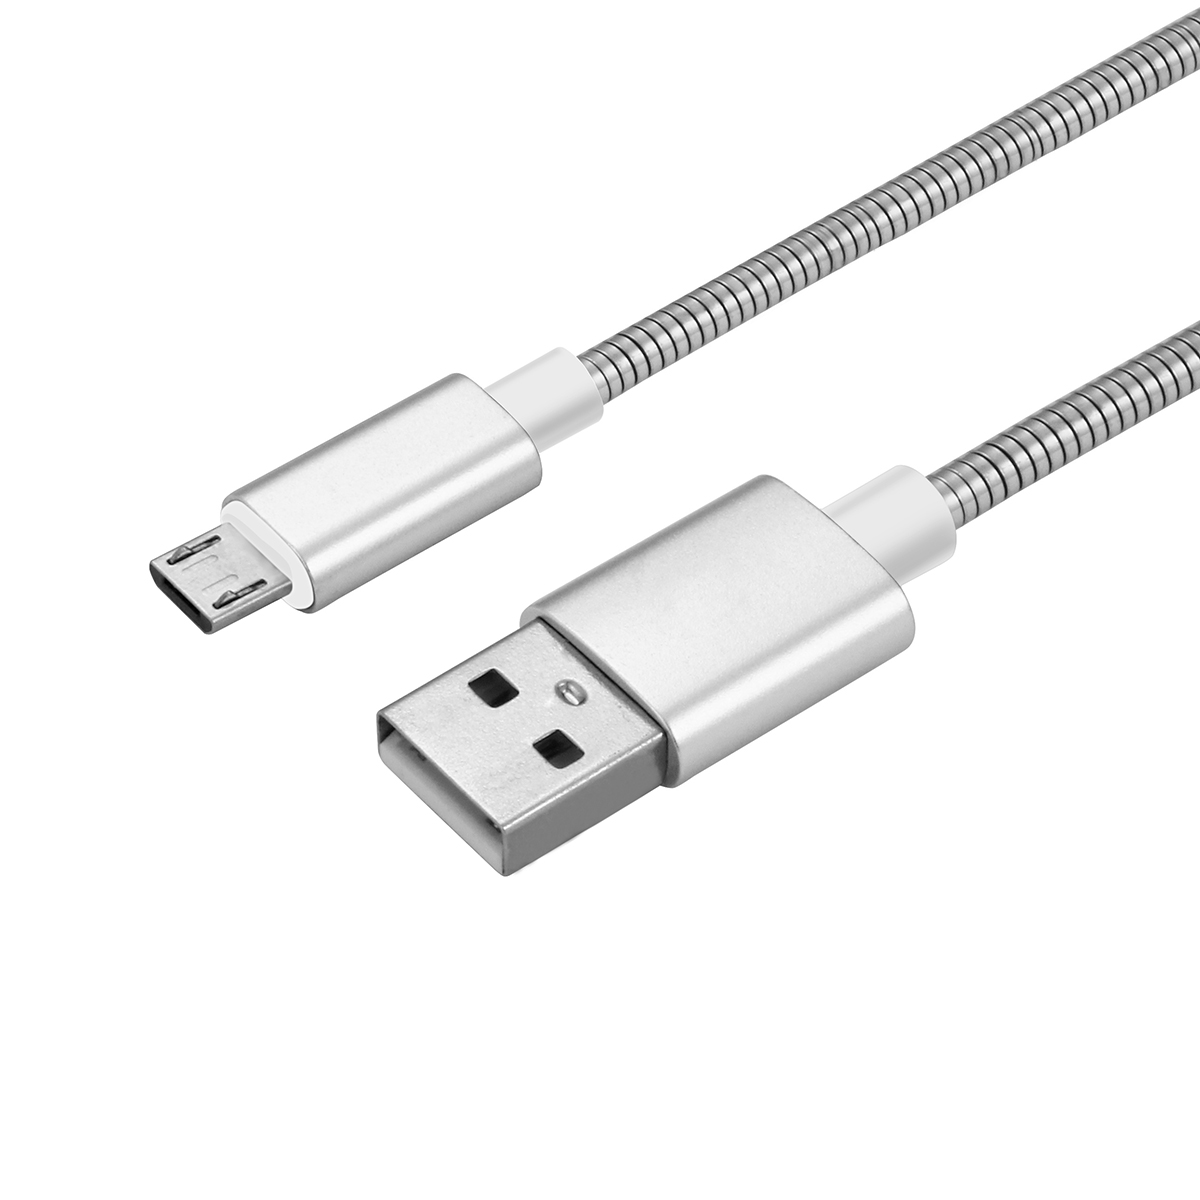 Metal Stainless Steel Spring Woven Micro USB Charging Data Cable for Android Devices - Silver